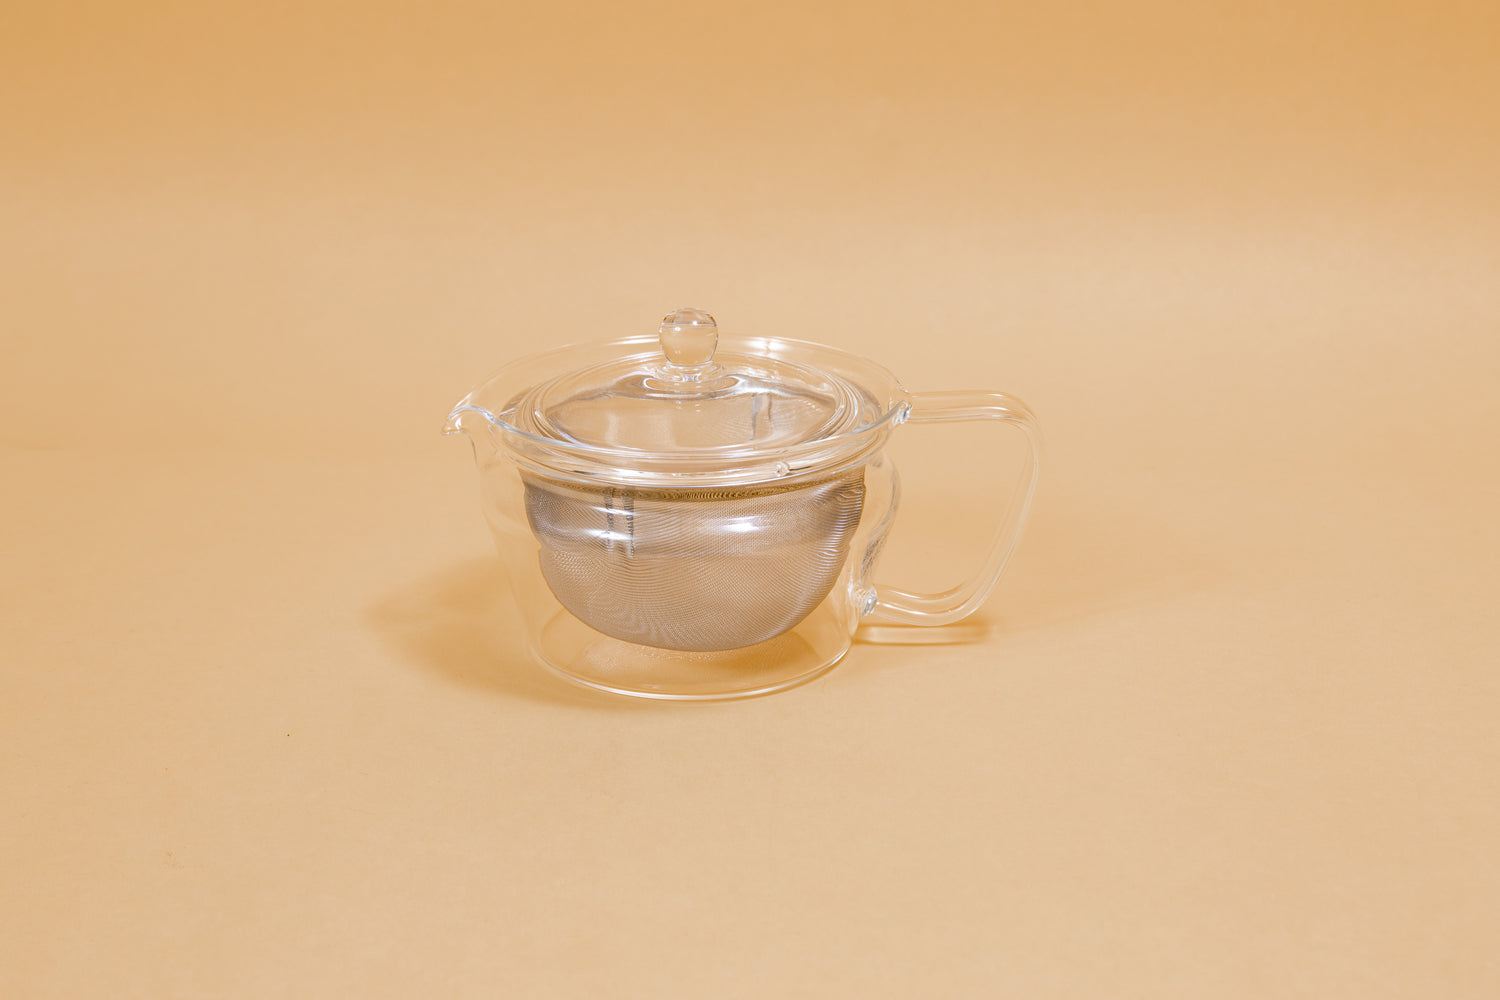 All glass tapered tea pot with flat bottom, all glass lid and handle, and metal mesh filter basket insert.